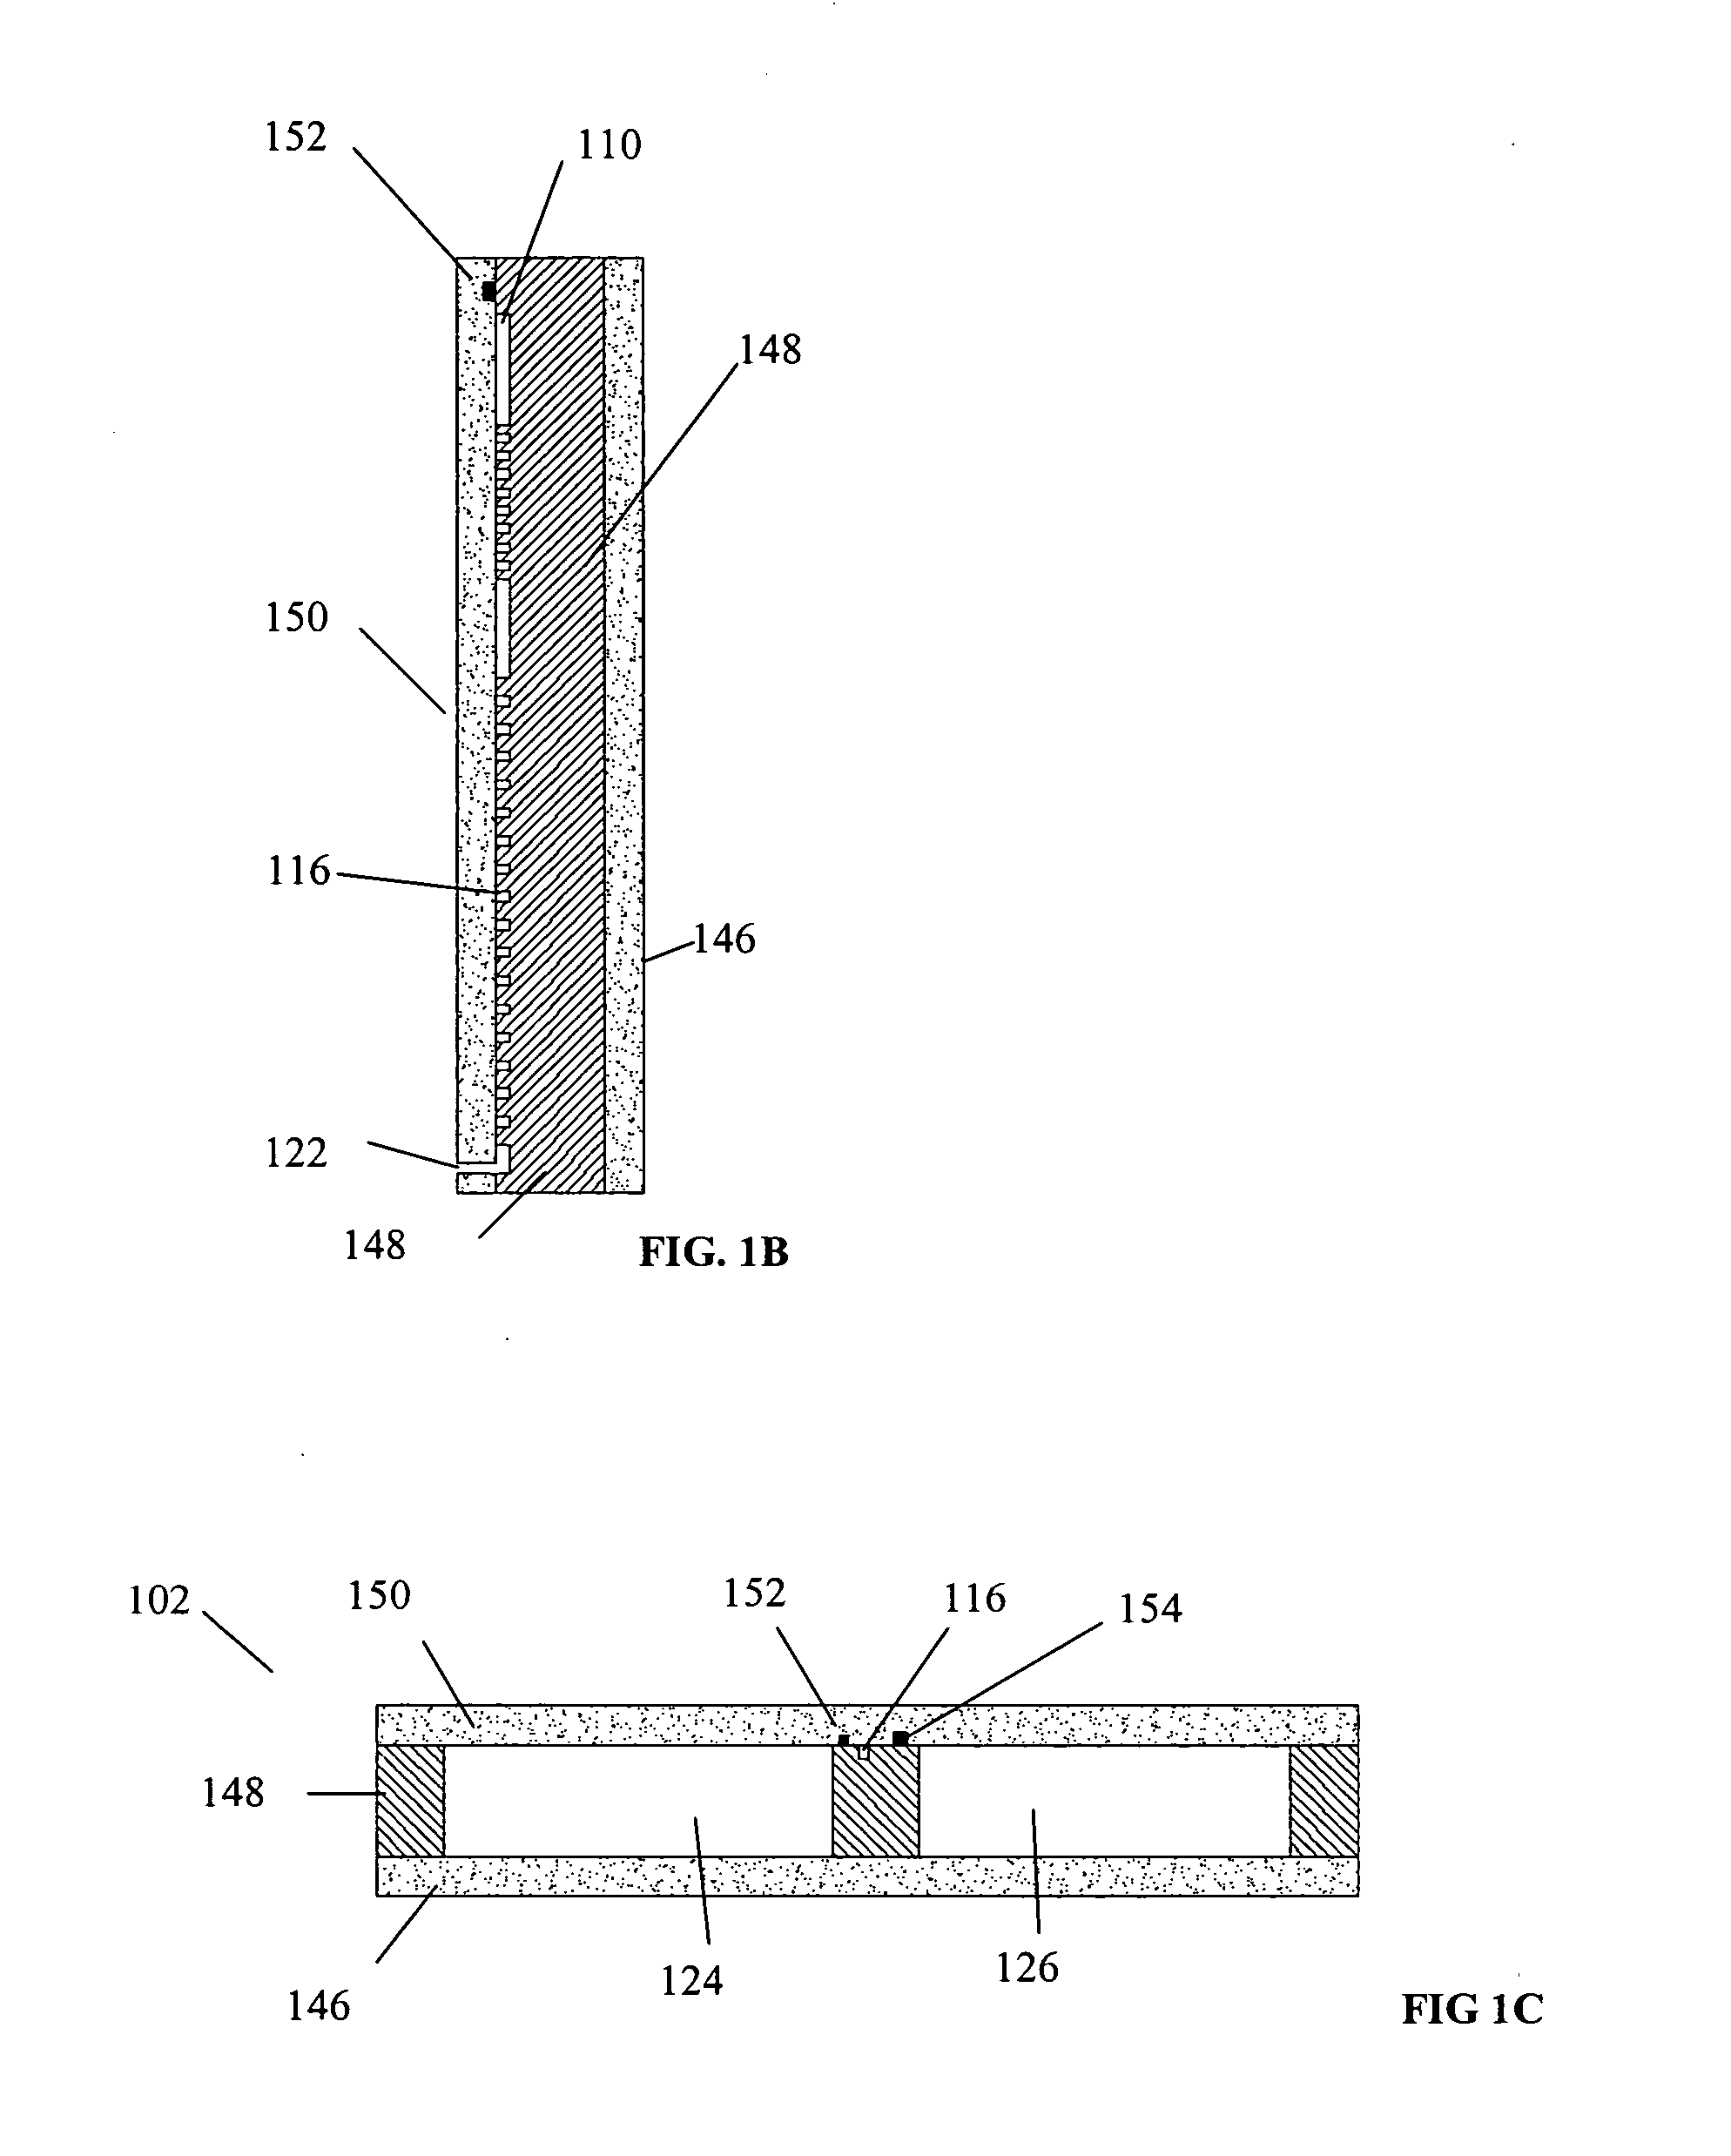 Microfluidic chemical reactor for the manufacture of chemically-produced nanoparticles